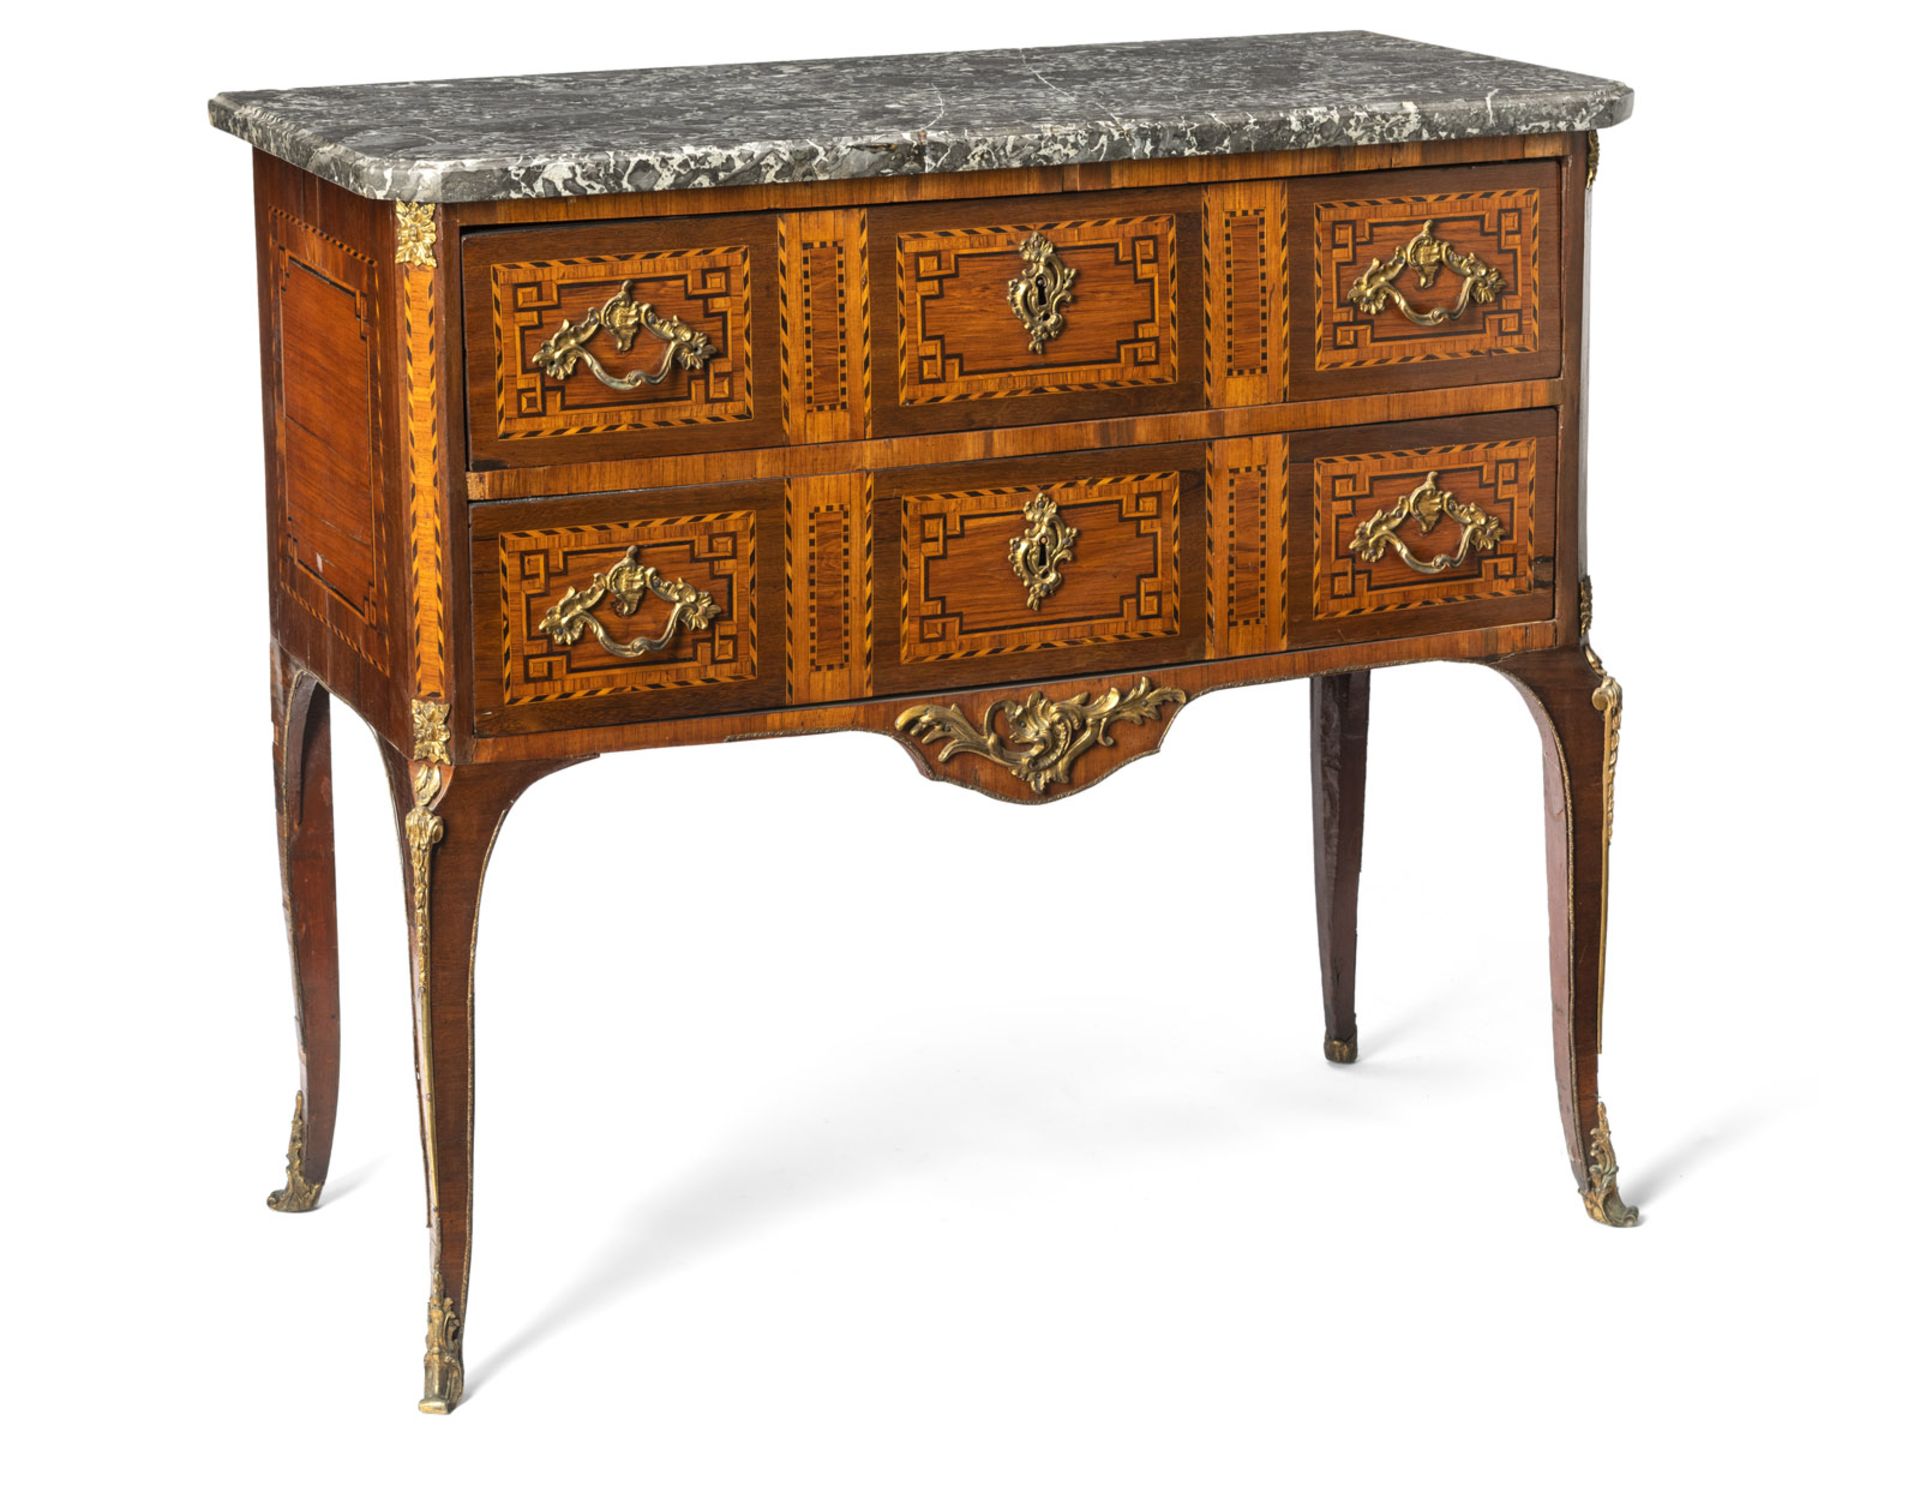 A FRENCH TRANSITIONAL STYLE ORMOLU MOUNTED KINGWOOD AMARANTH AND FRUITWOOD MARQUETRY COMMODE